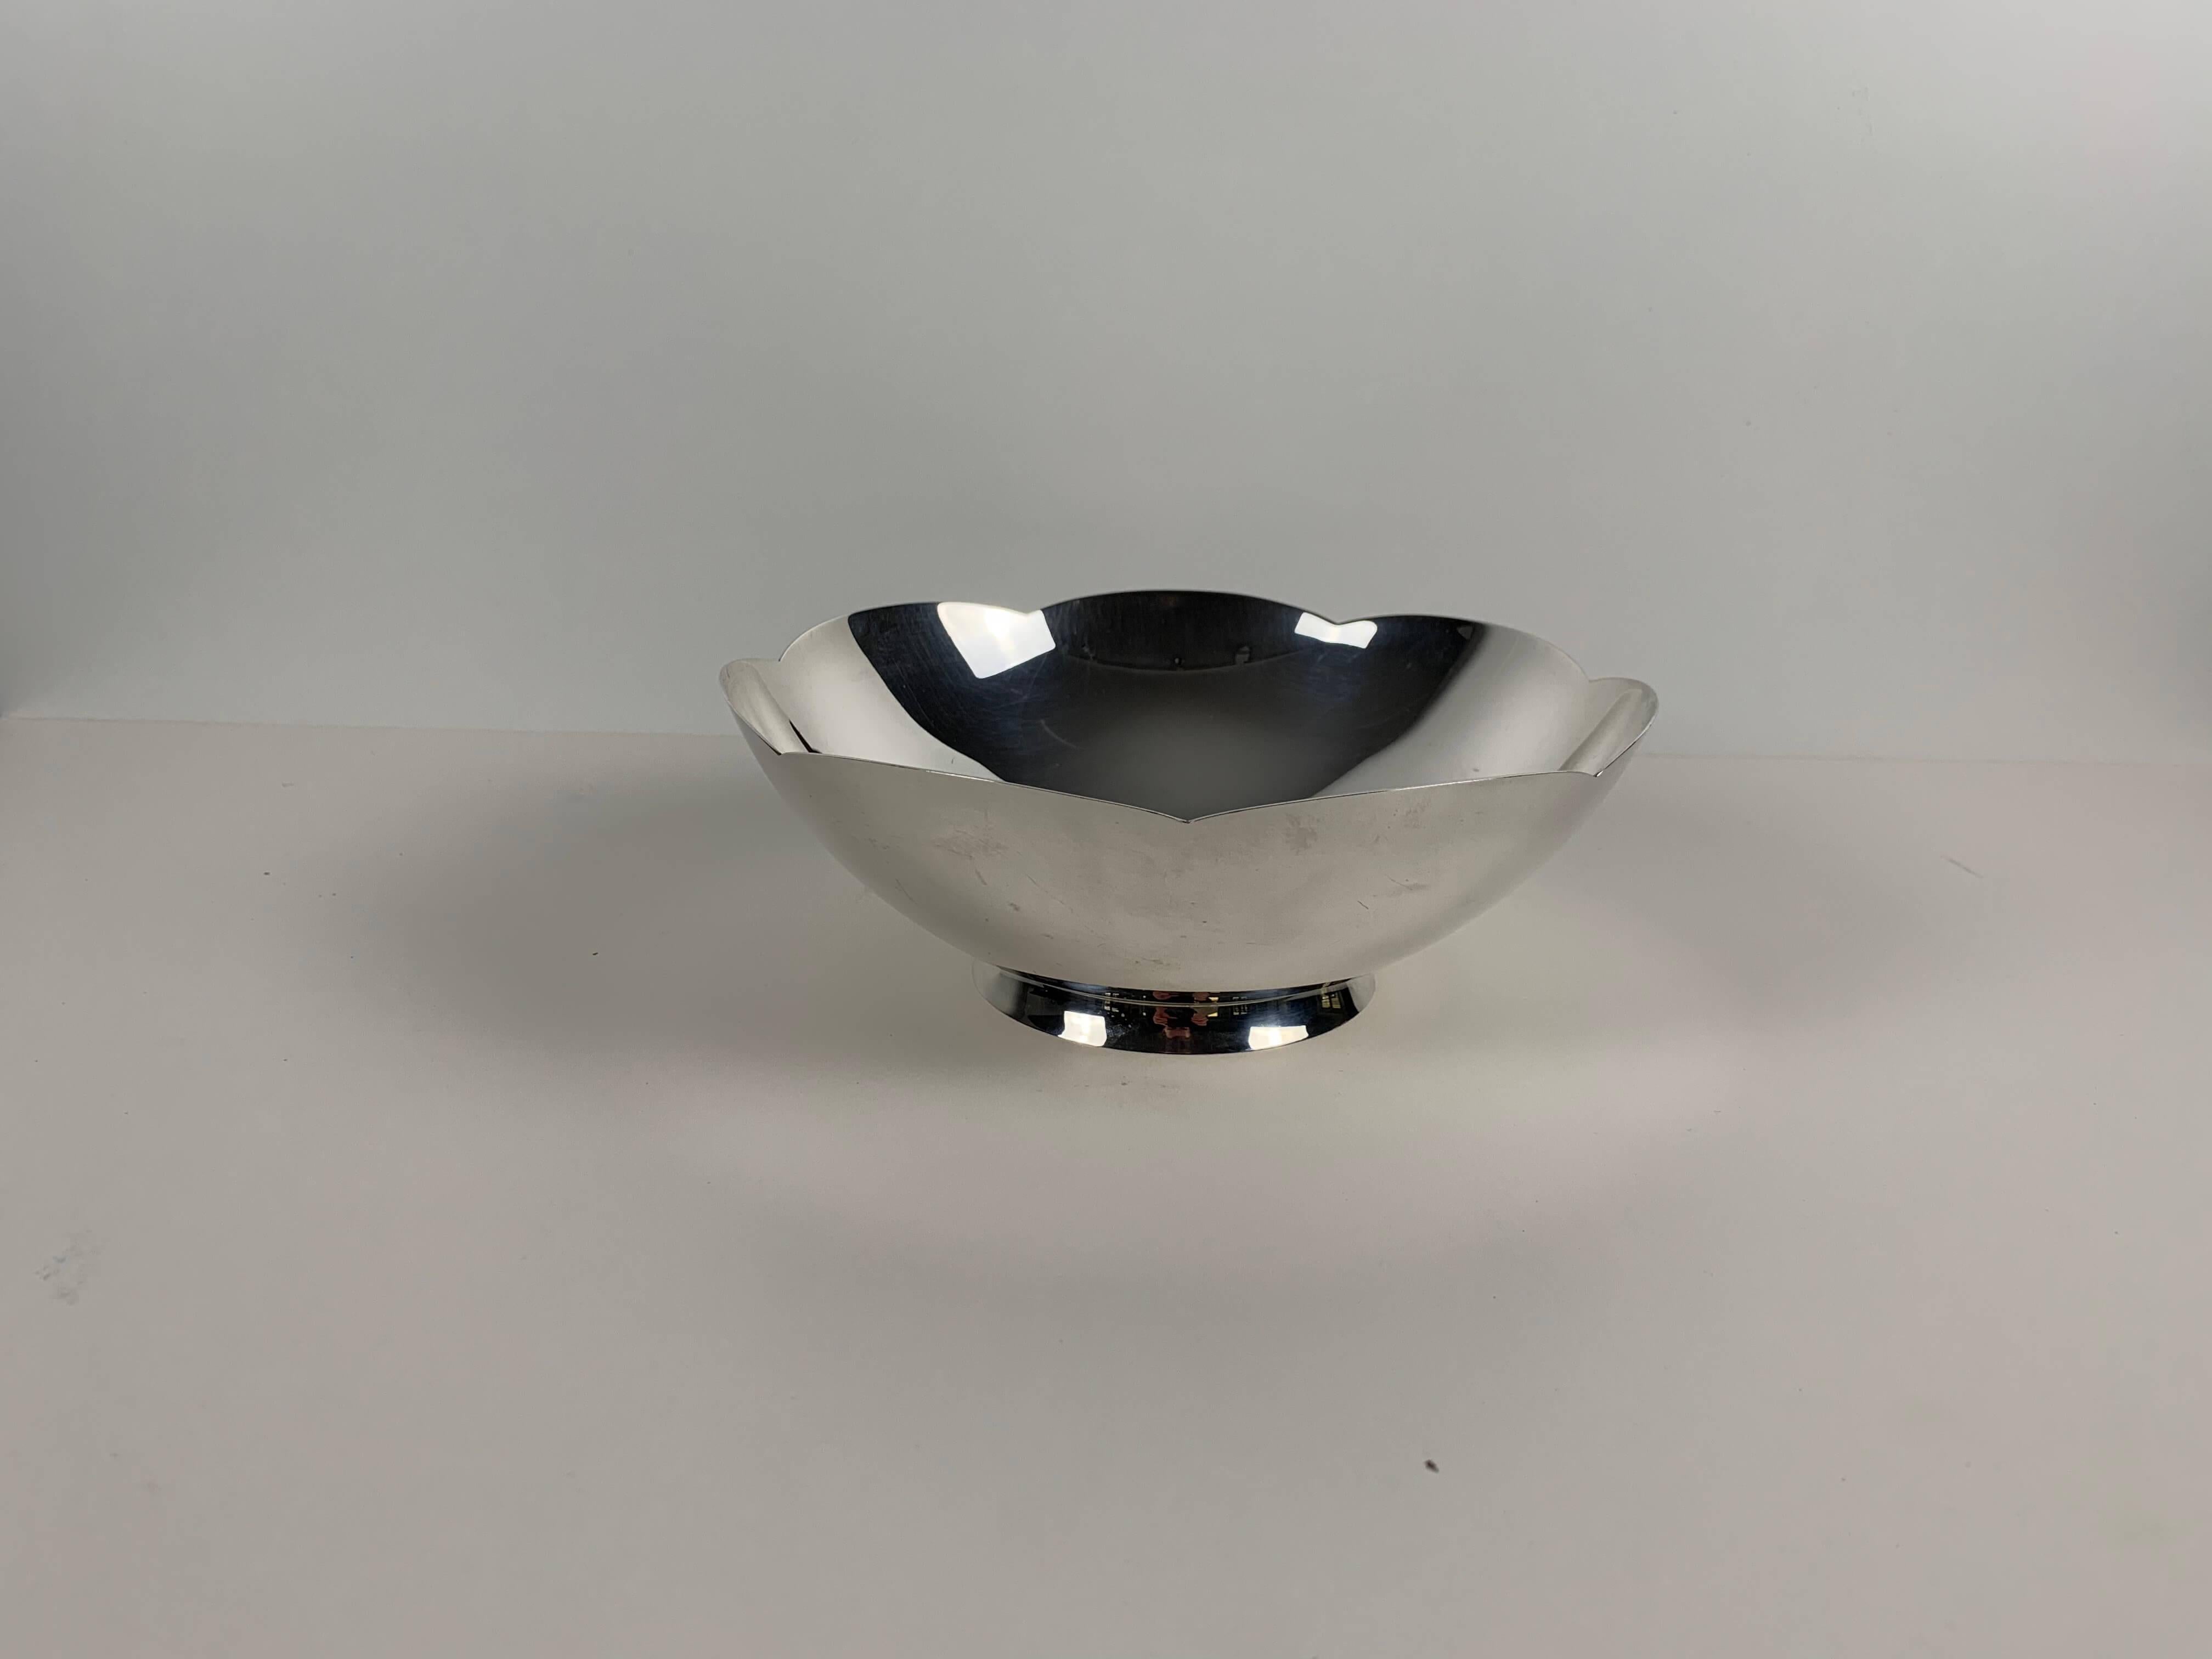 American Art Deco Bowl by Tiffany & Co., New York, Sterling Silver, 1920-40s